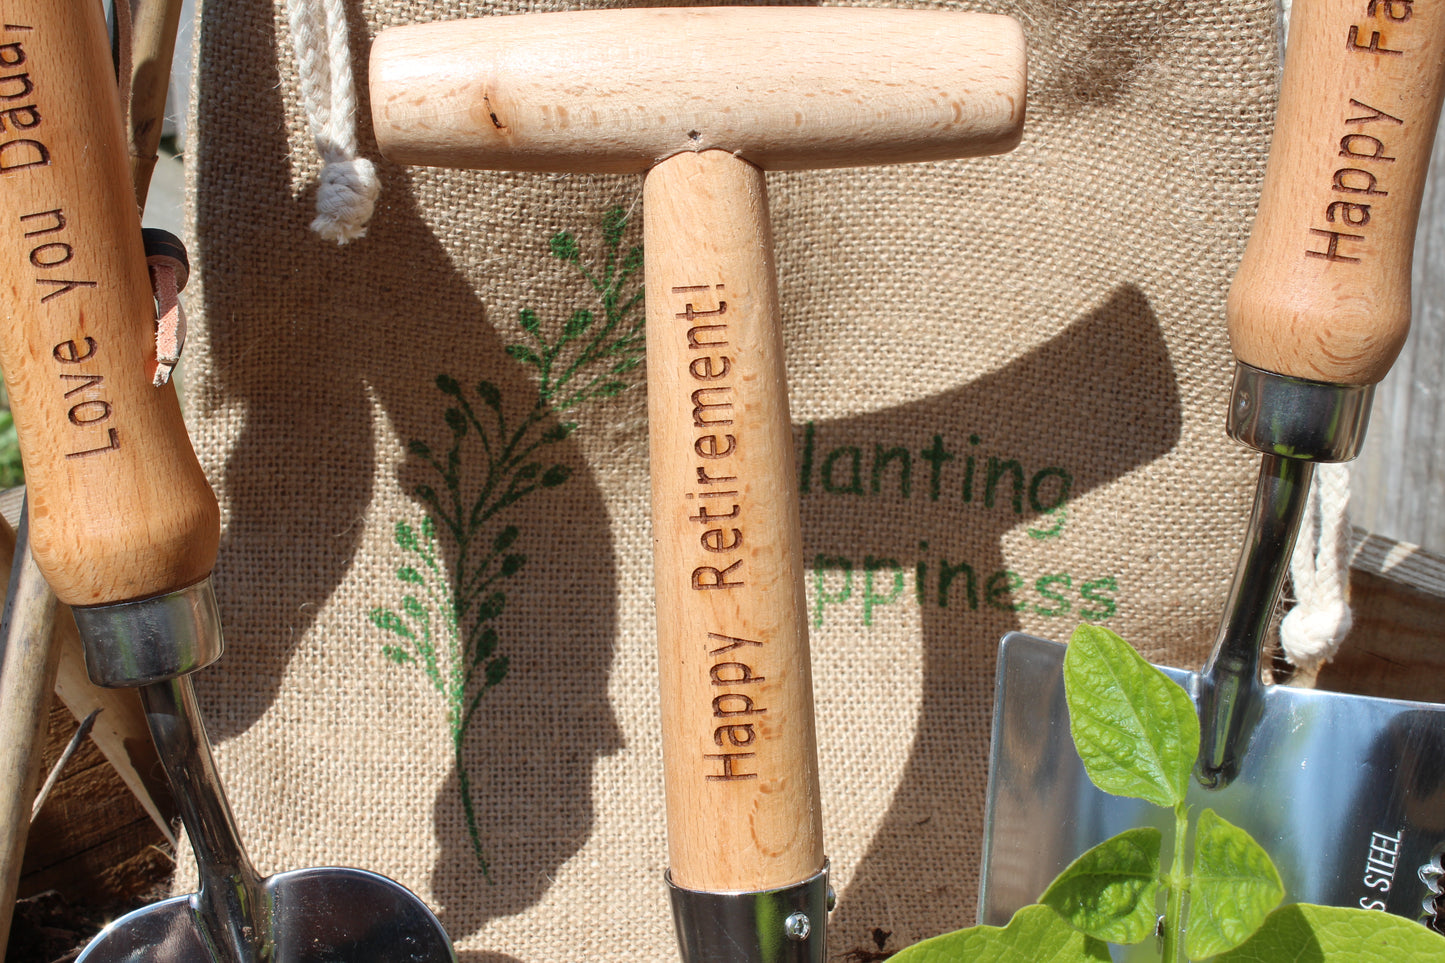 Personalised Garden Tools Gift Set